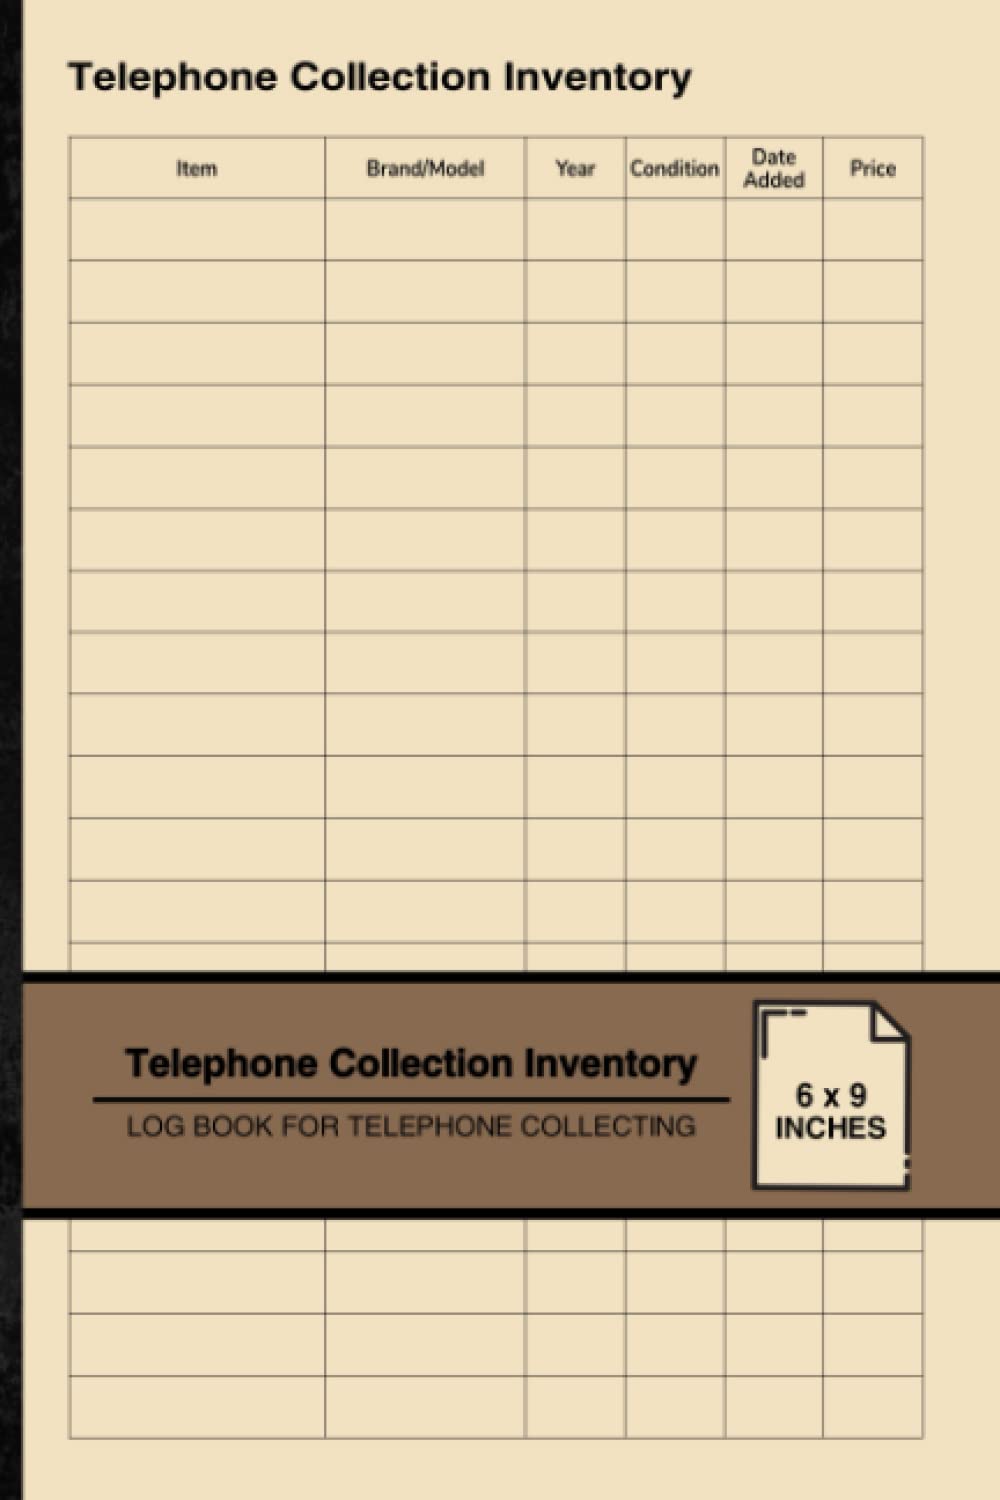 Telephone Collection Inventory: Log Book For Telephone Collecting | For Telephone Collectors | Small